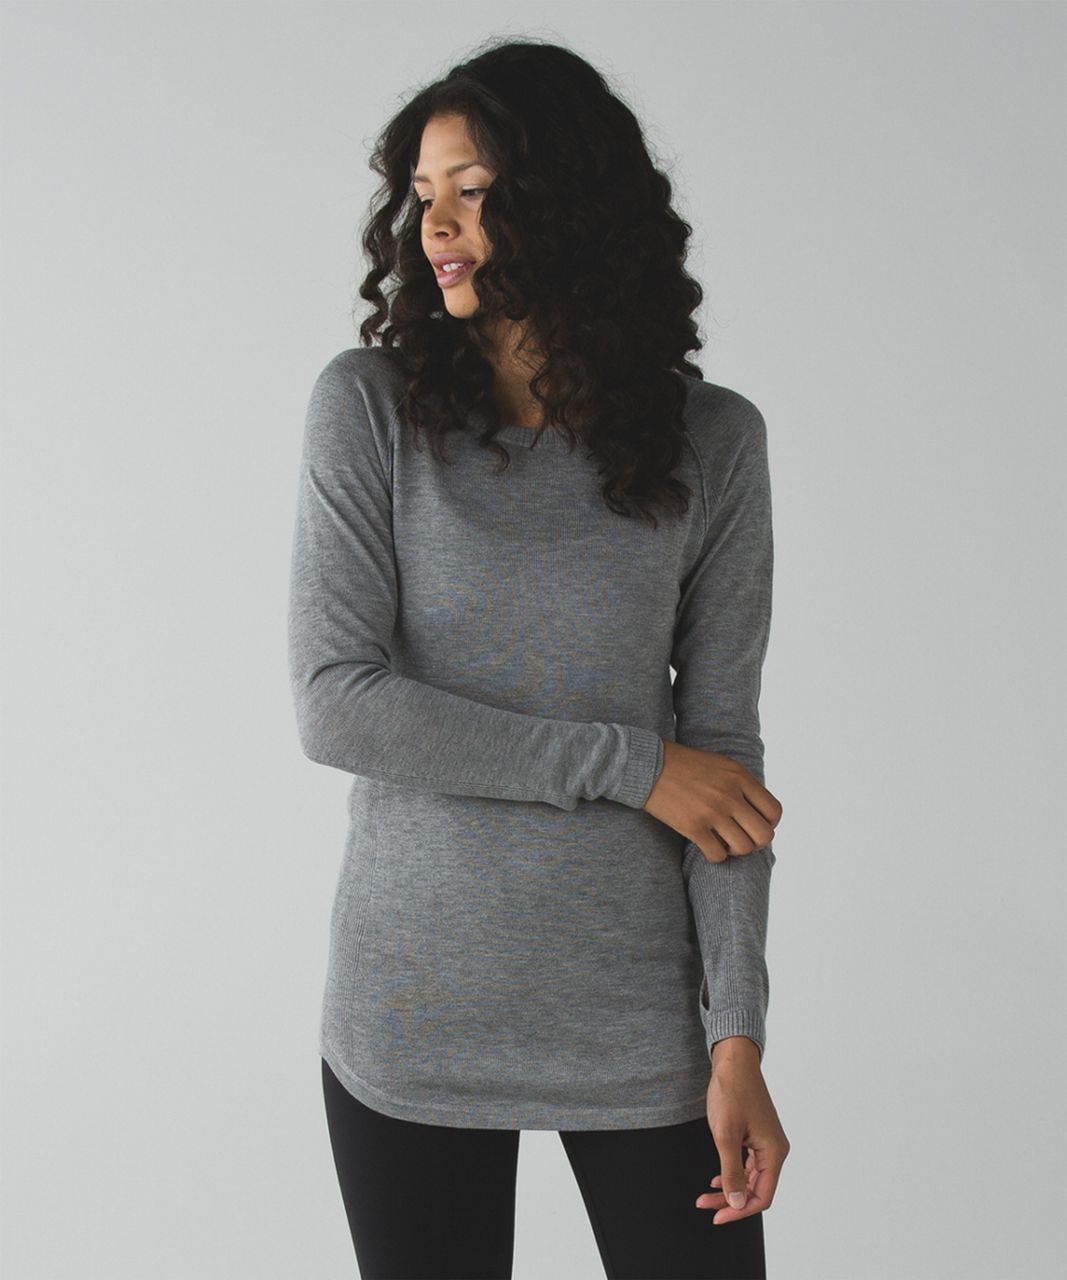 NWT LULULEMON TUCK and Flow Long Sleeve Heathered Soot Light Gray Size 6  $164.68 - PicClick AU